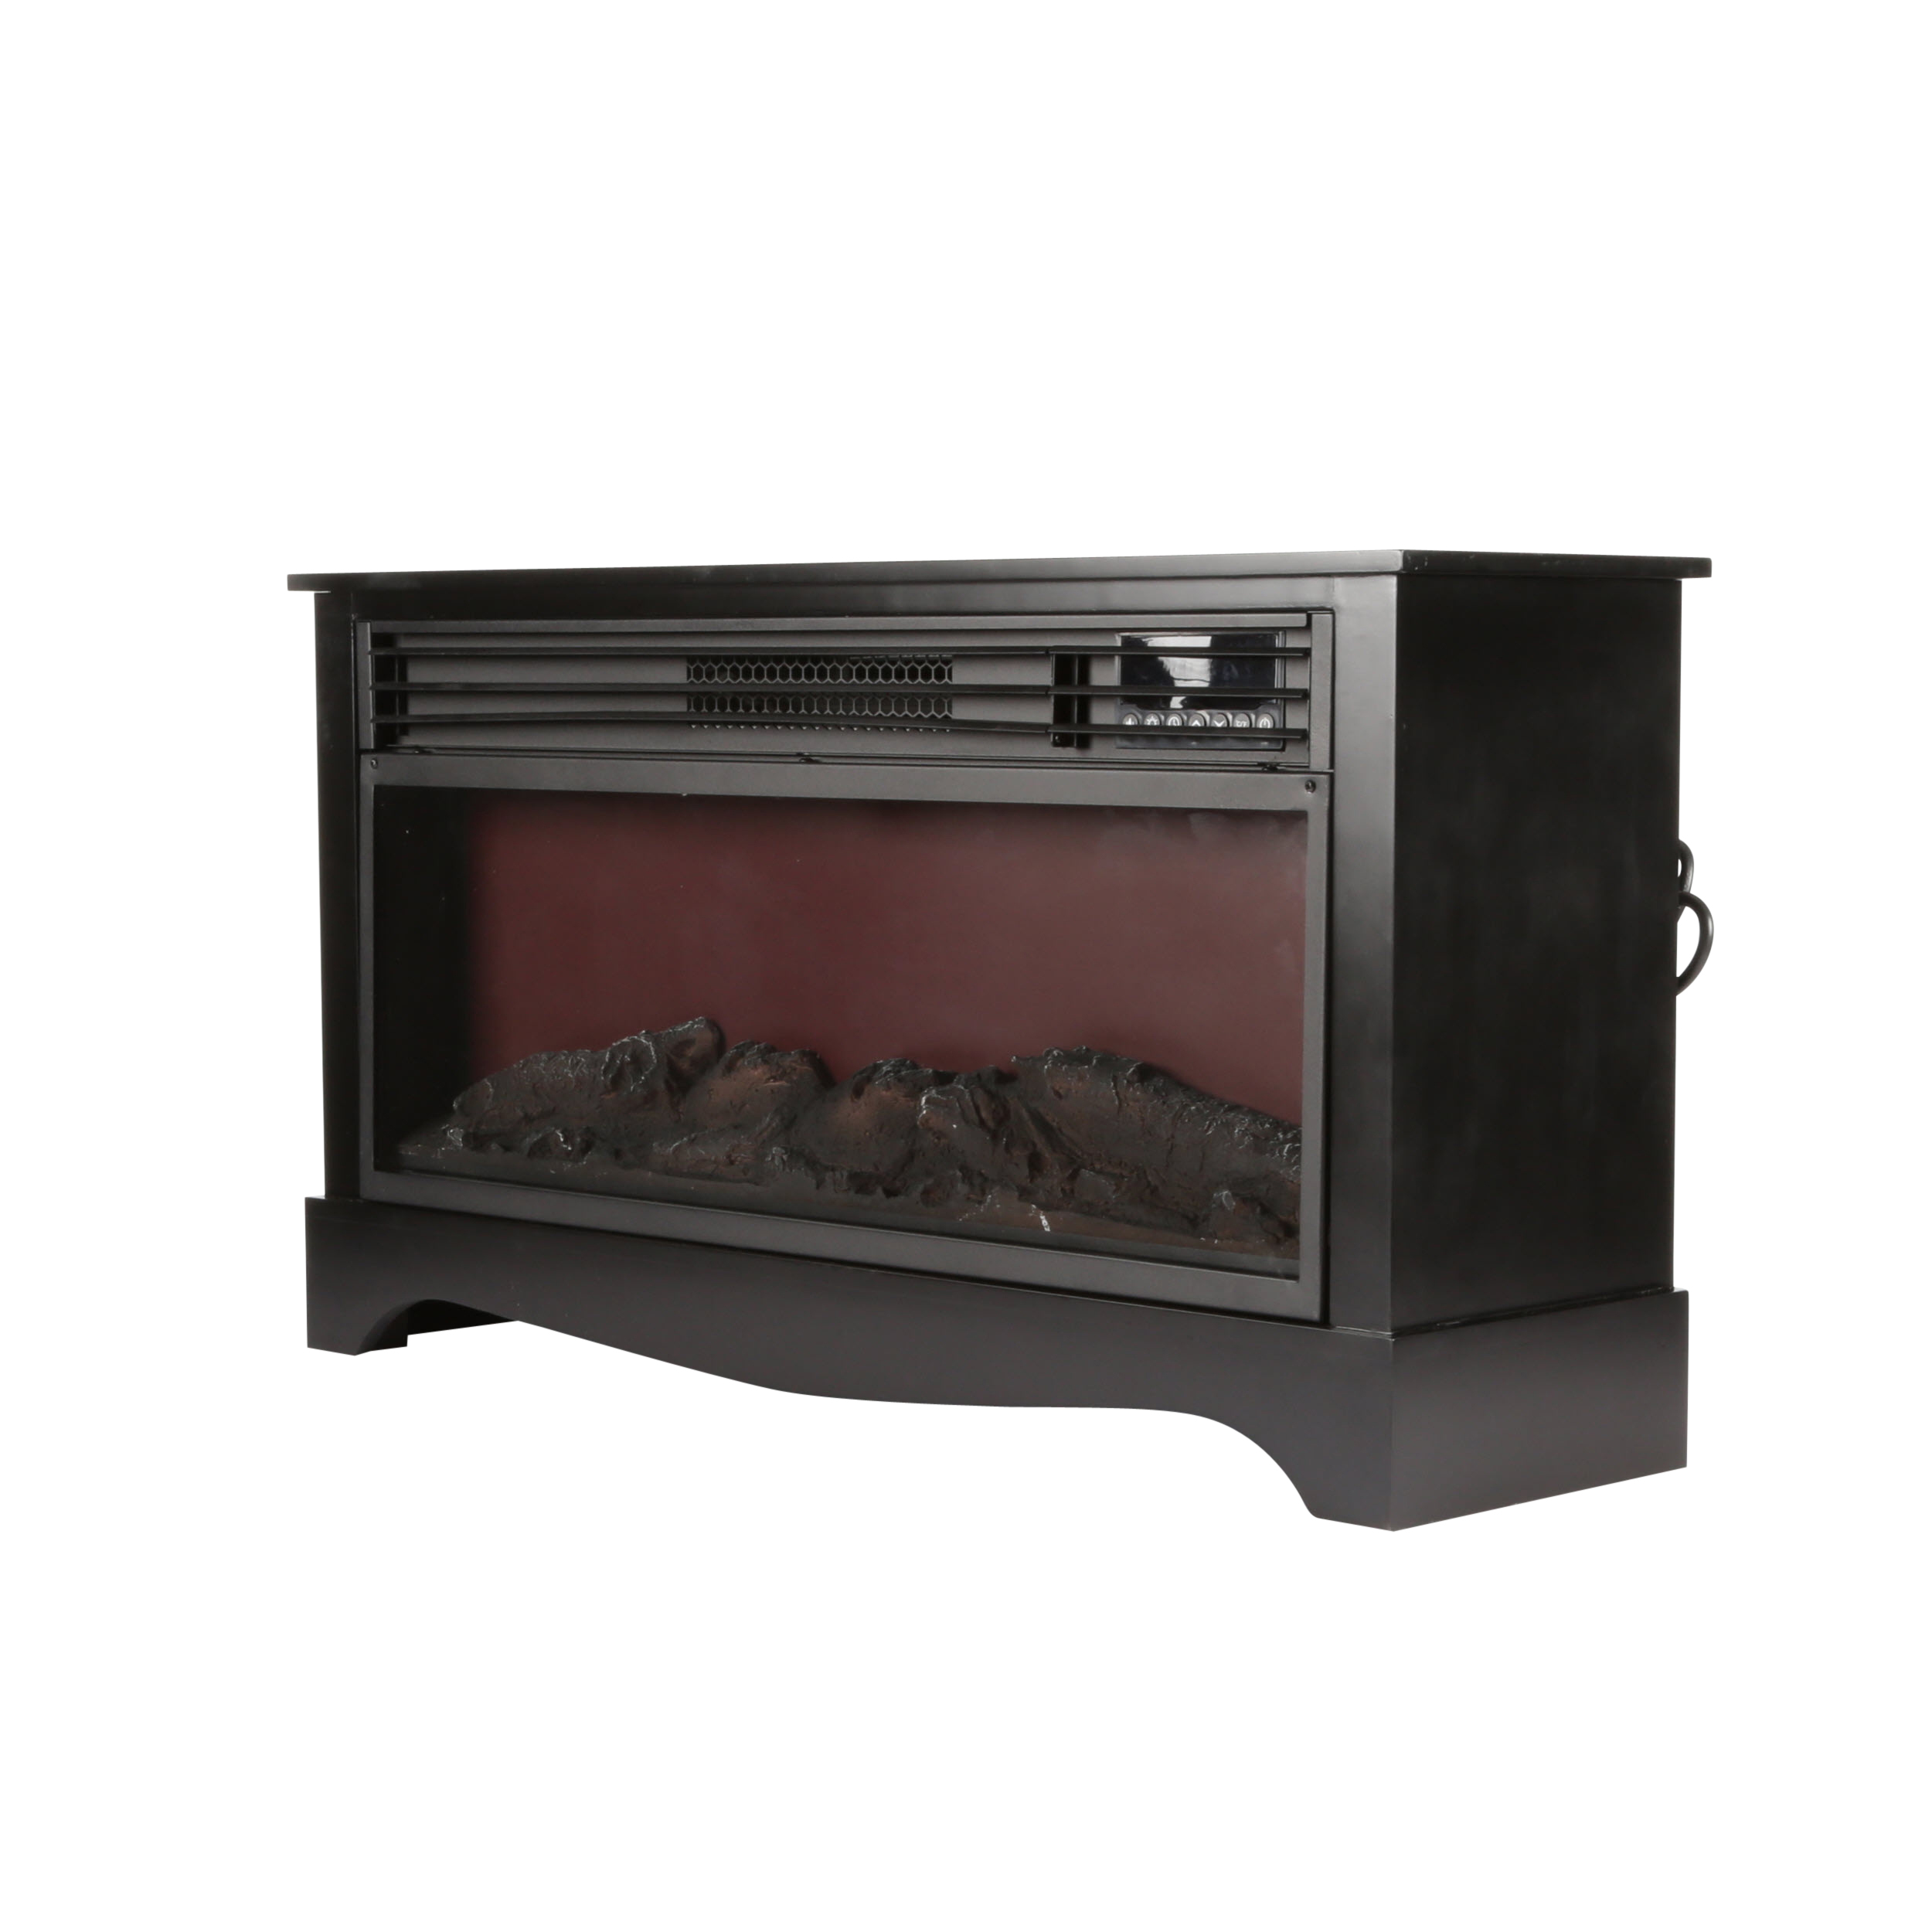 Lifesource 20" Tall Heater Fireplace with Color-Change LED Affect, Black Cabinet - image 1 of 5